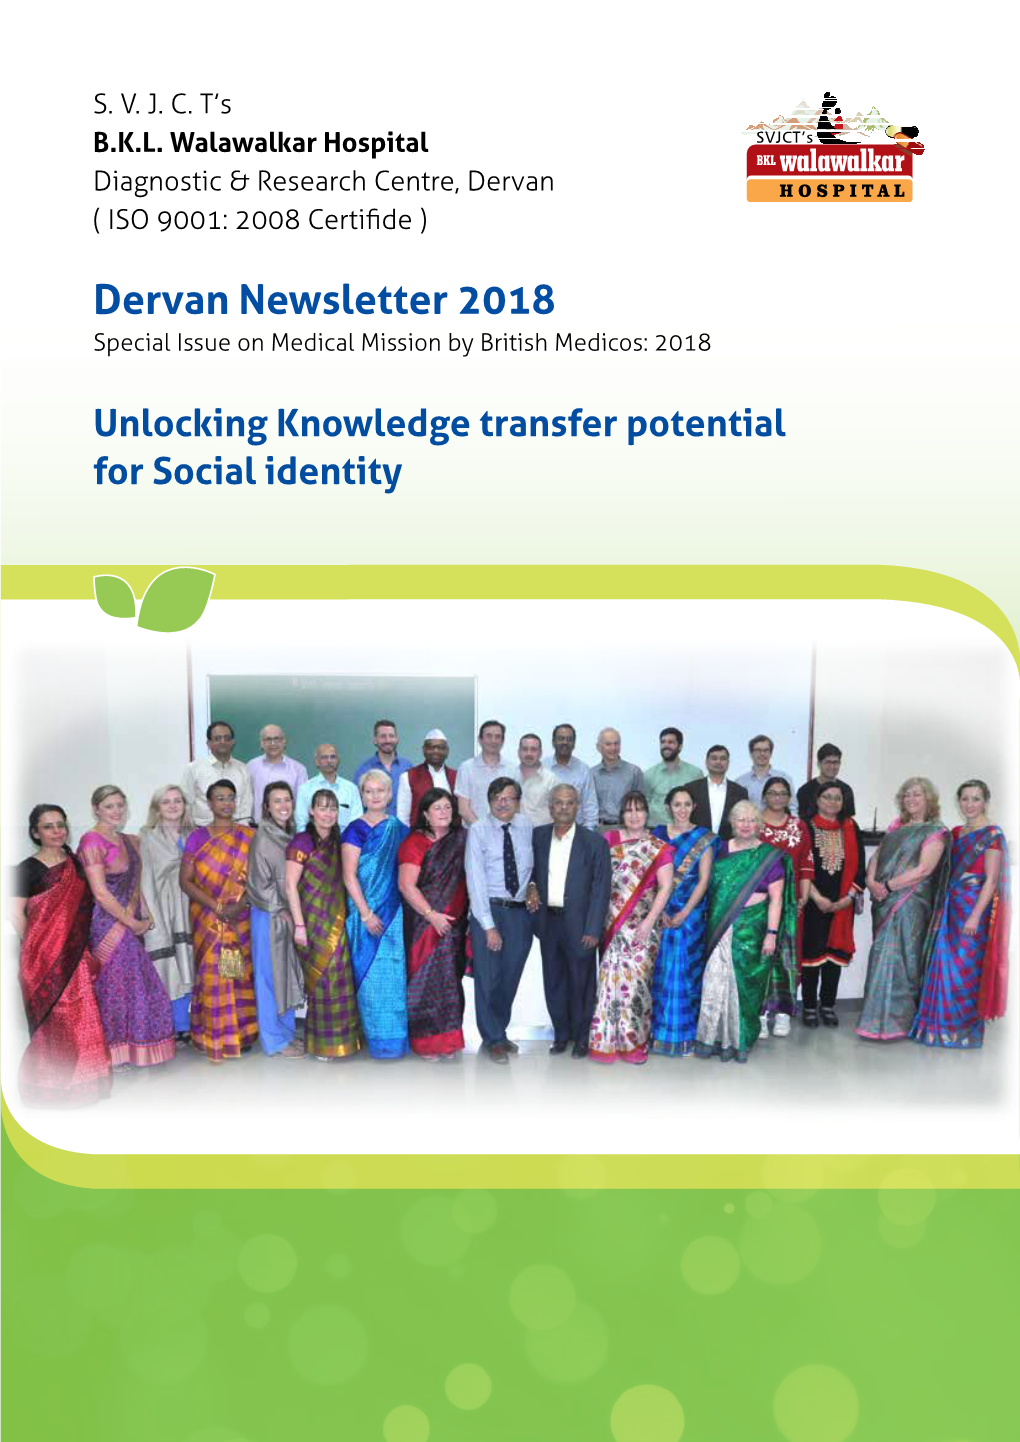 Dervan Newsletter 2018 Special Issue on Medical Mission by British Medicos: 2018